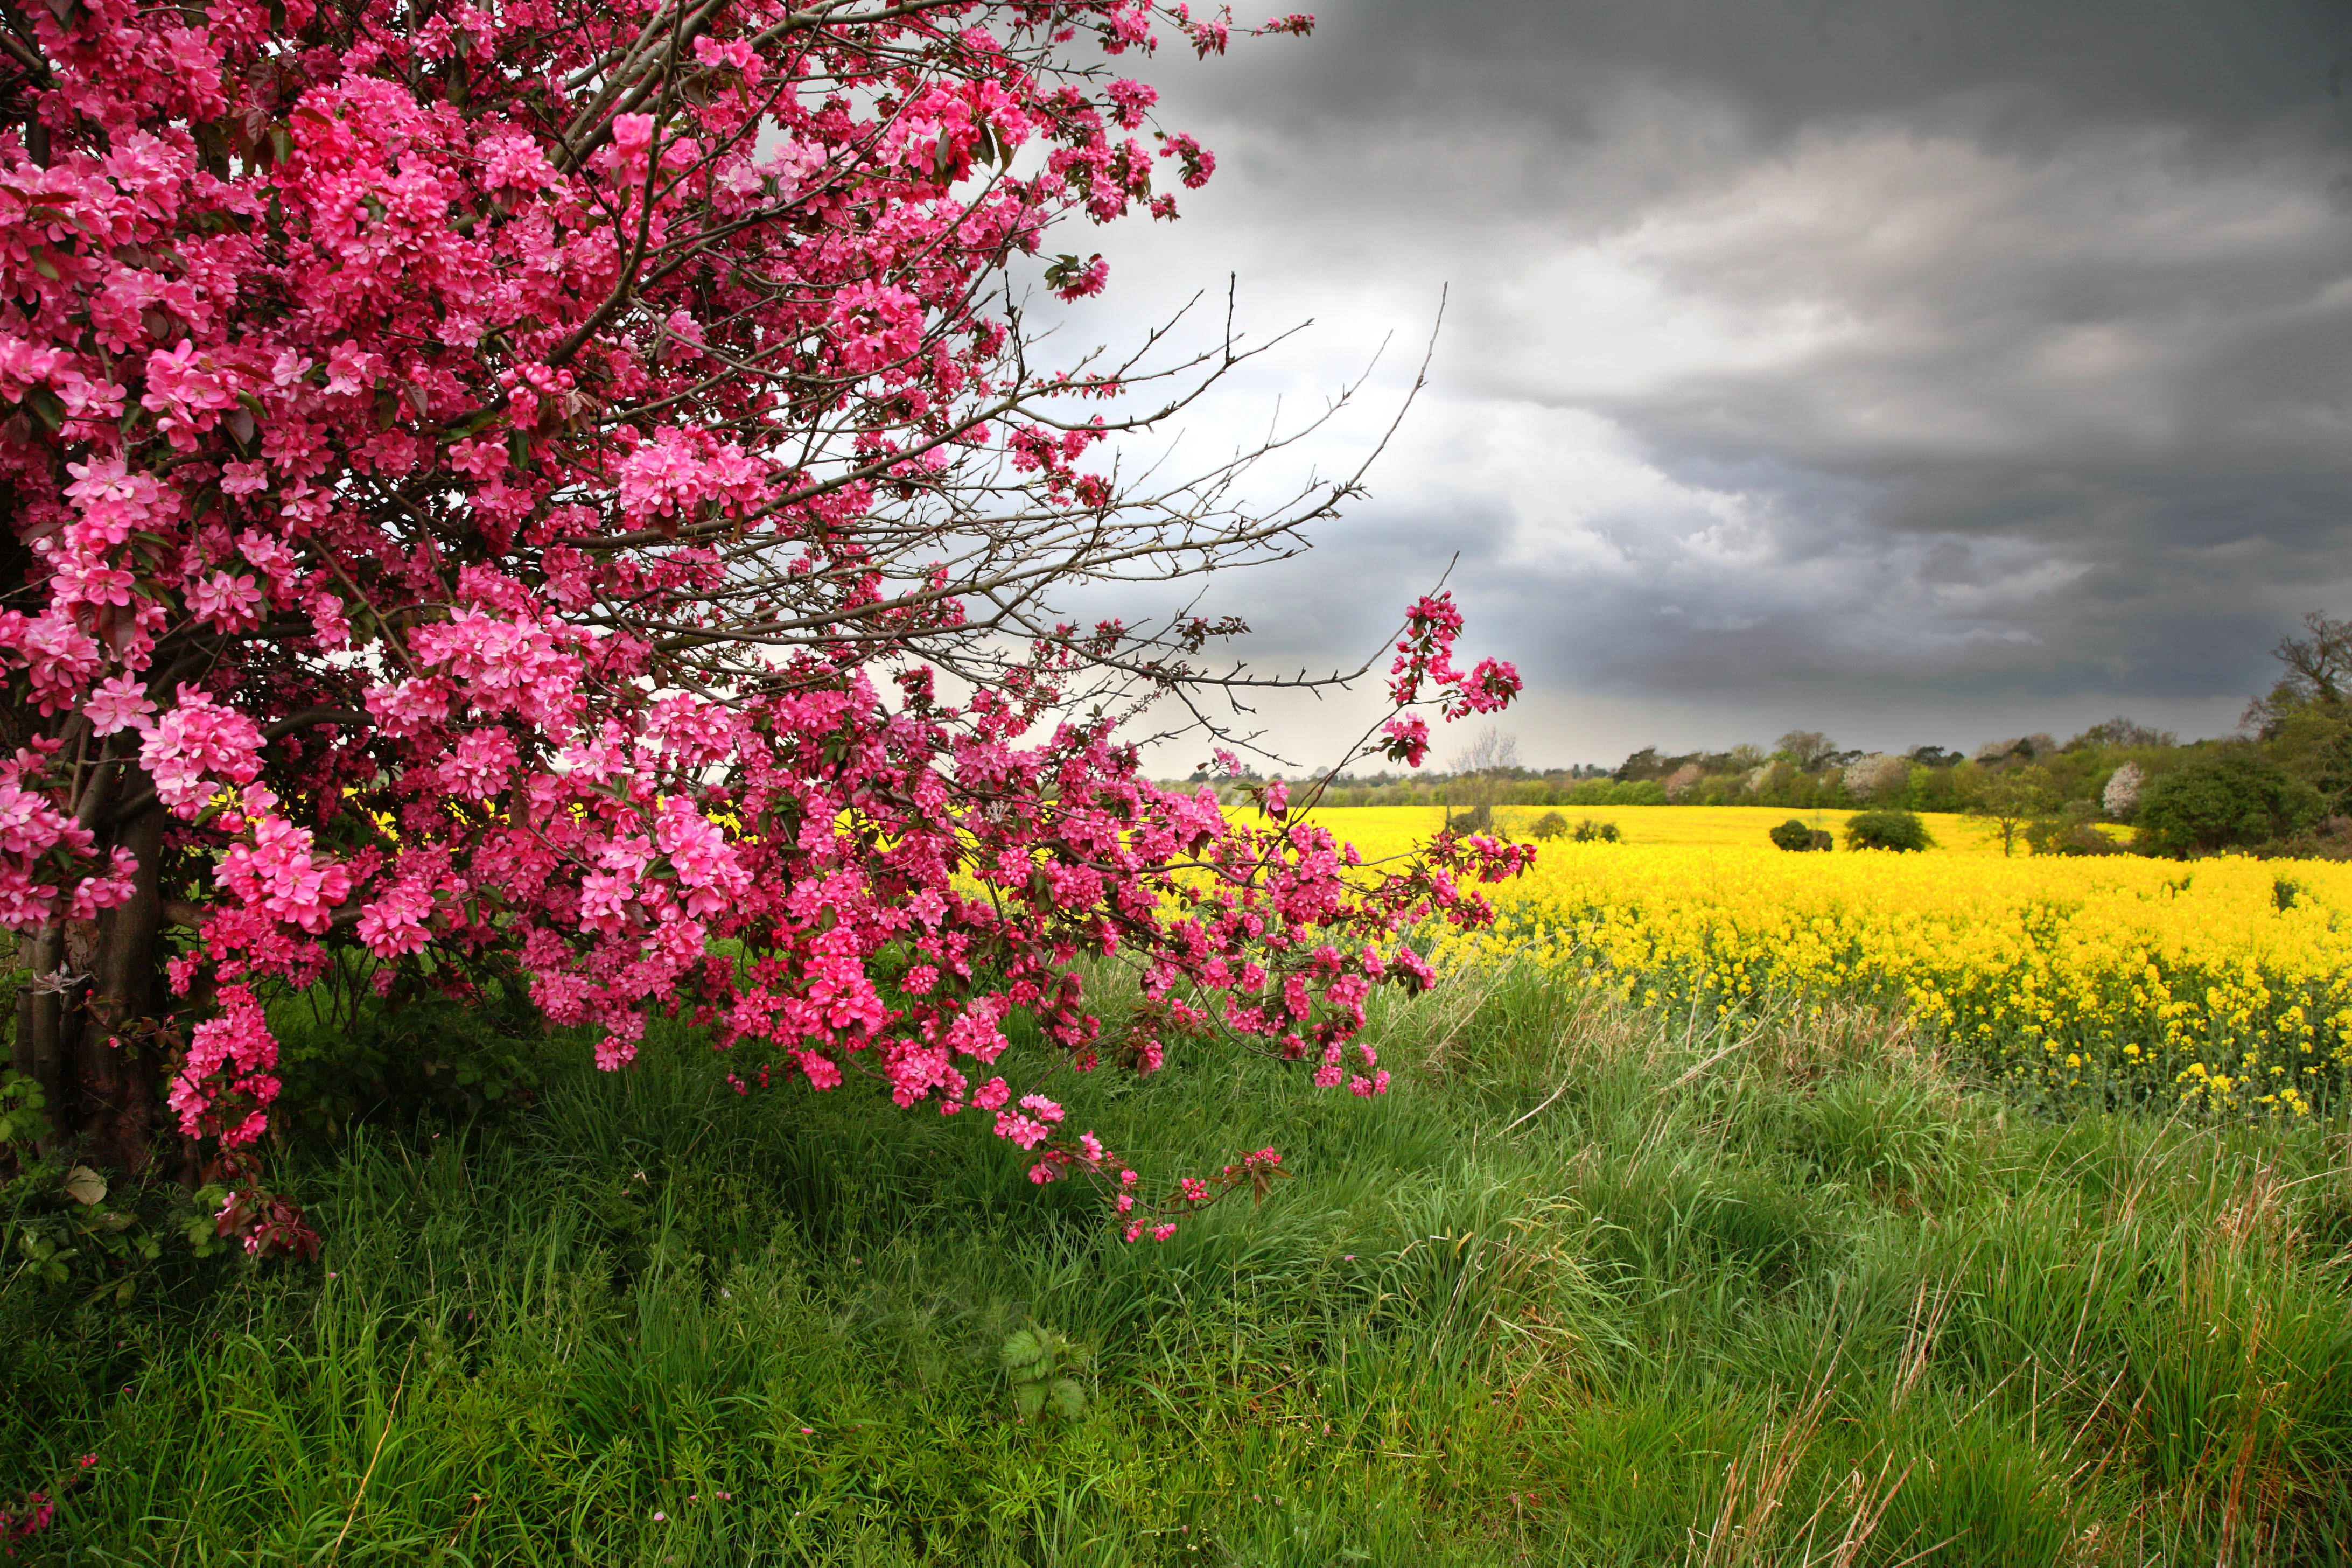 Nature spring tree flowers / 4368 x 2912 / Nature / Photography ...